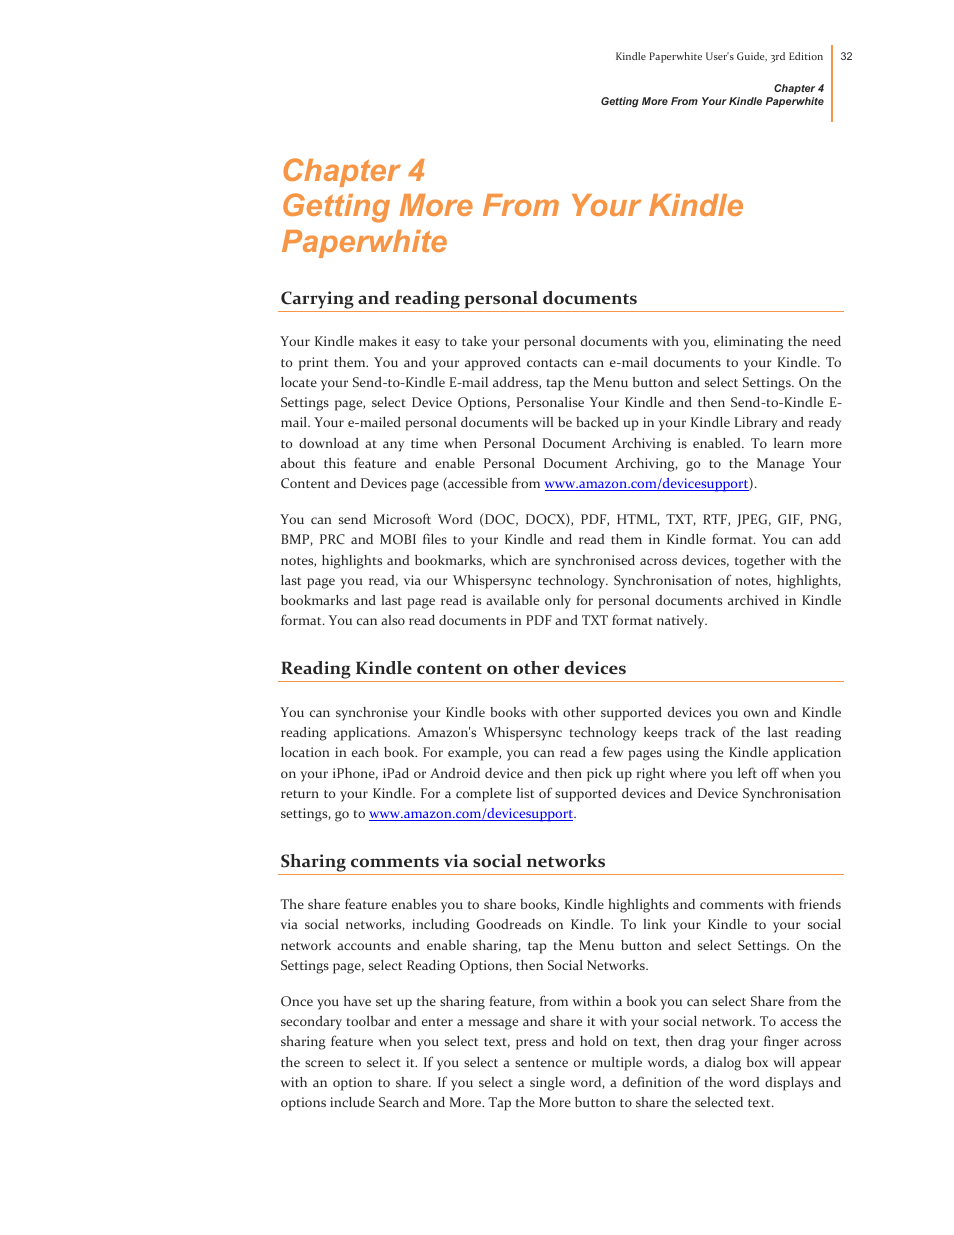 Chapter 4 getting more from your kindle paperwhite, Carrying and reading personal documents, Reading kindle content on other devices | Sharing comments via social networks, Reading kindle content on other, Devices | Kindle Paperwhite (2nd Generation) User Manual | Page 32 / 47